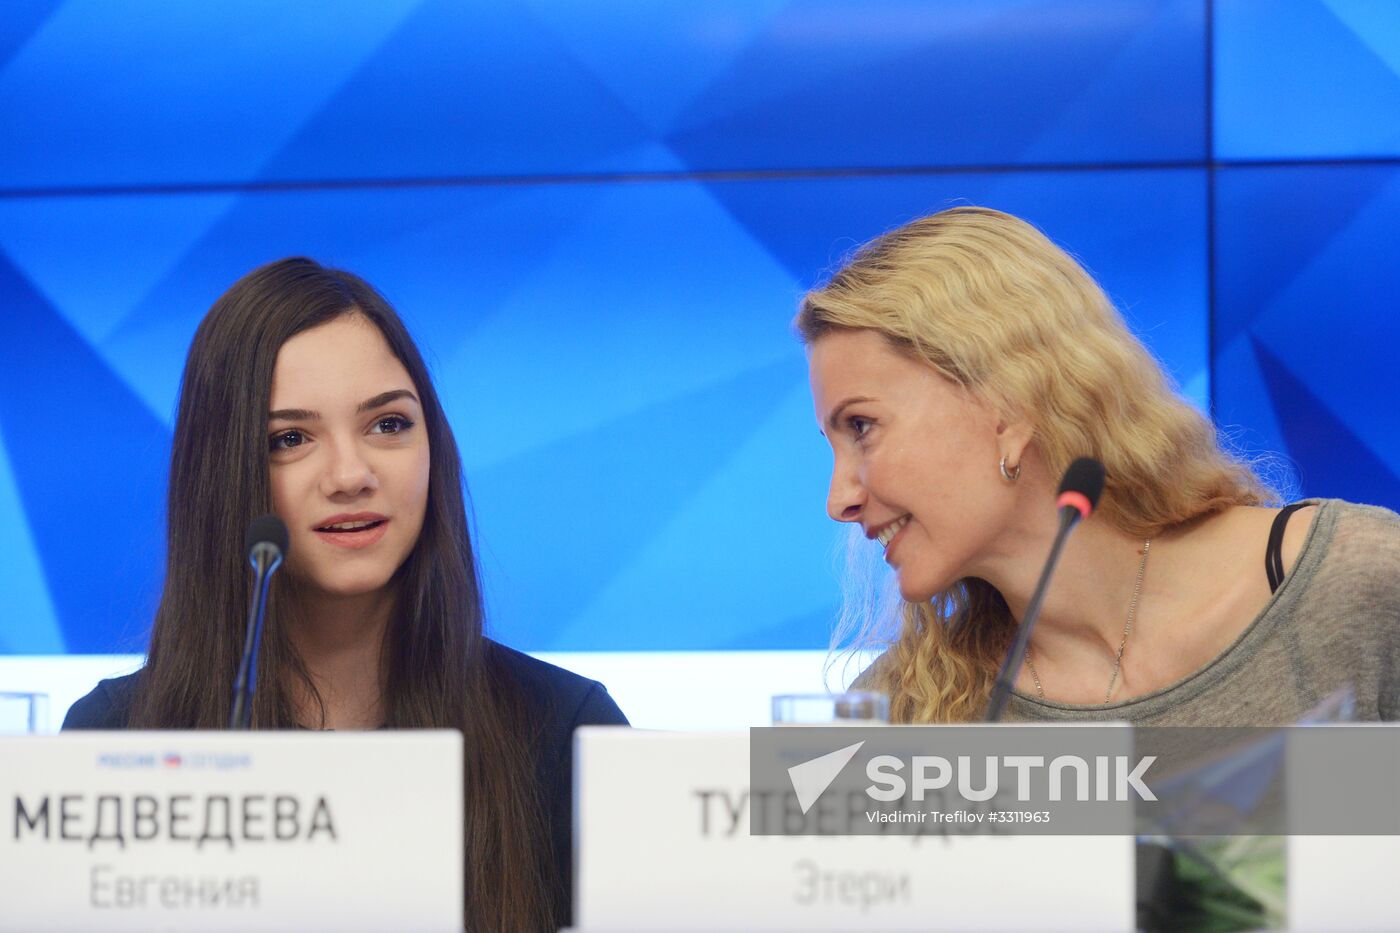 Russian Figure Skating Federation gives news conference